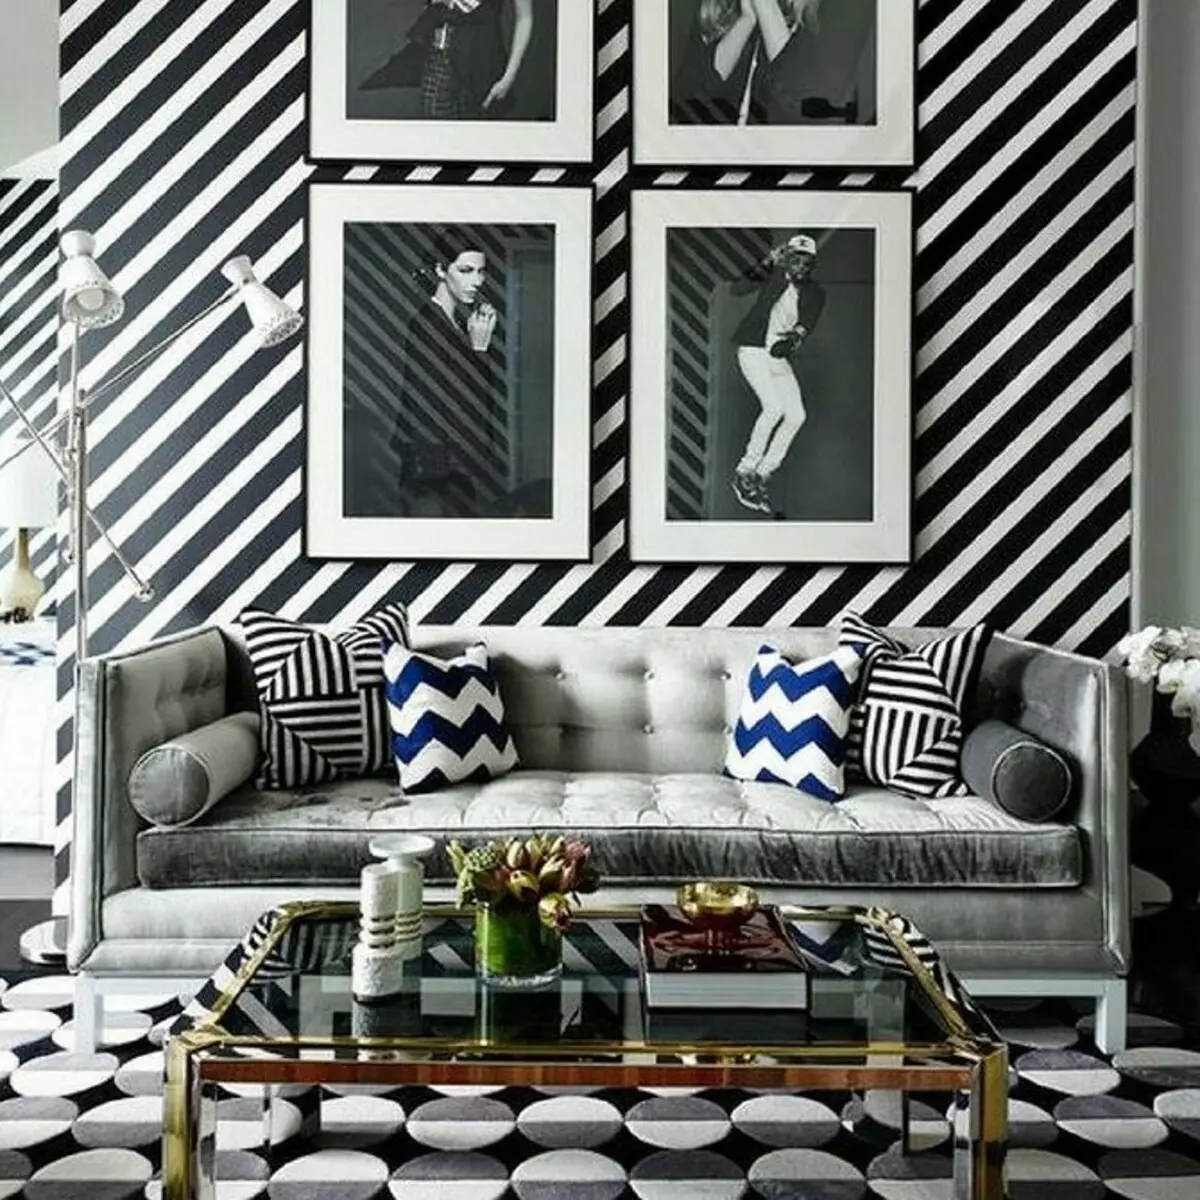 How to transform an interior with a print with stripes: 4 useful ideas 8674_17